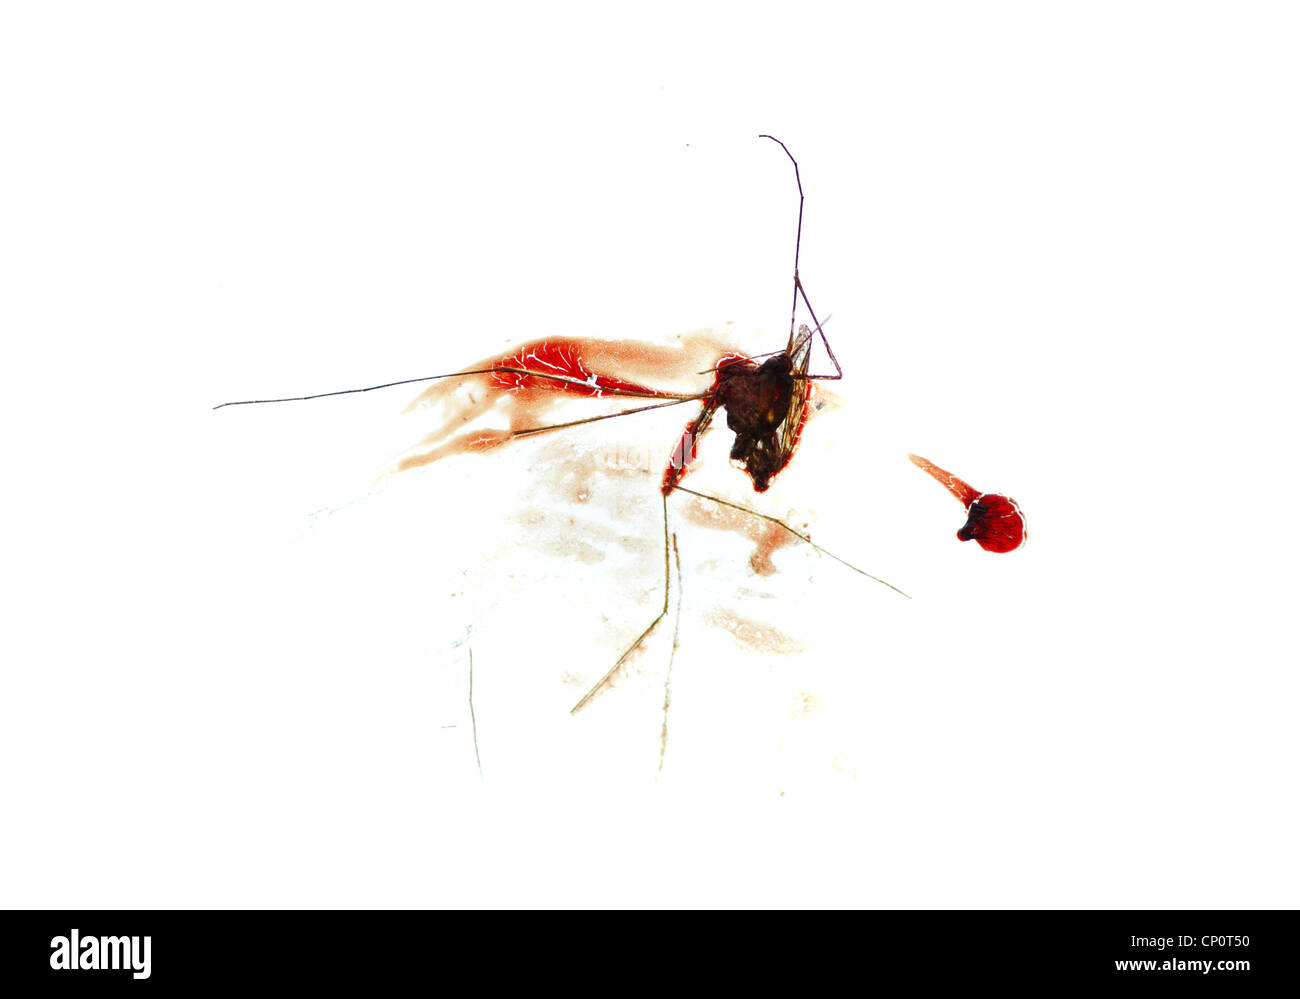 bloody mosquito squished onto glass with light background Stock Photo